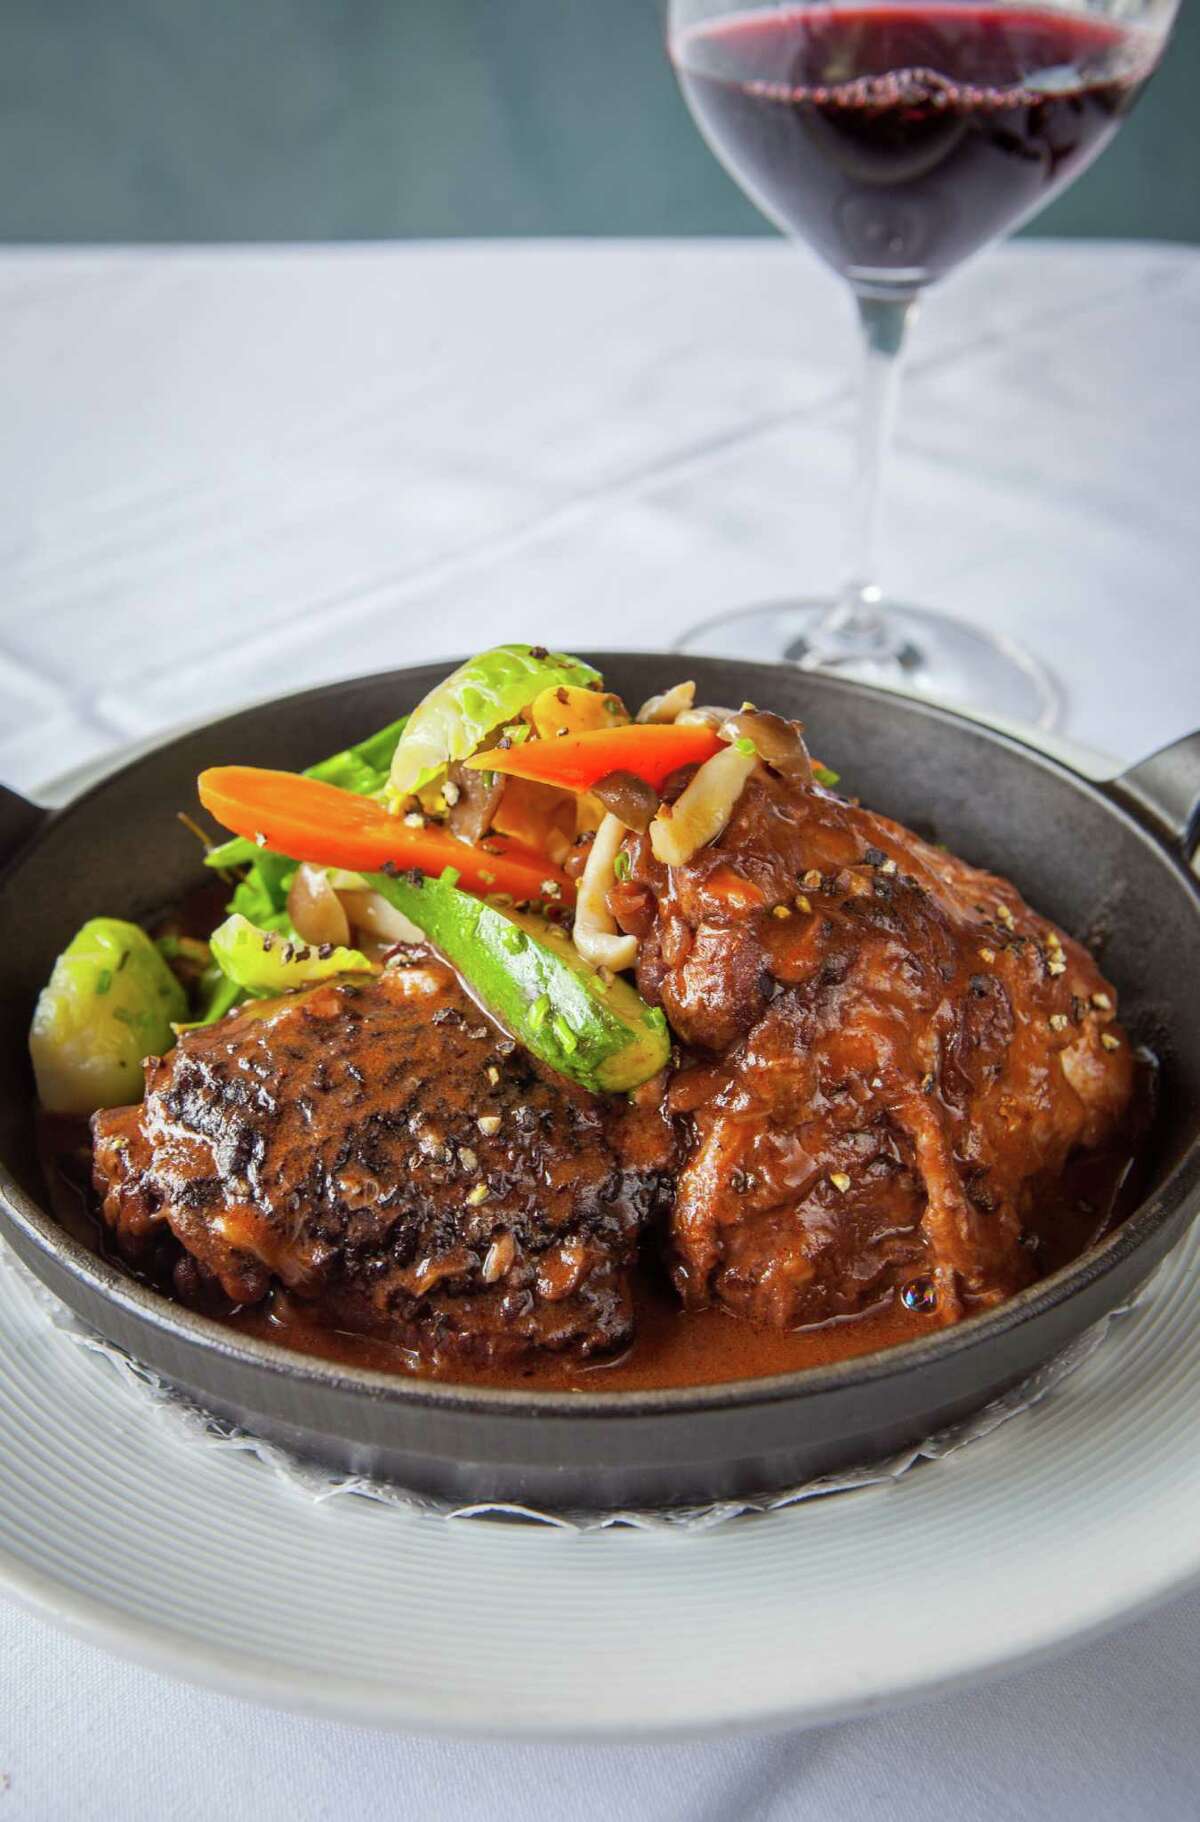 Etoile Cuisine et Bar: Coq au Vin, chicken braised in red wine with creamy potatoes and spring vegetables. Etoile's coq au vin, chicken braised in red wine, creamy potatoes, spring vegetables.